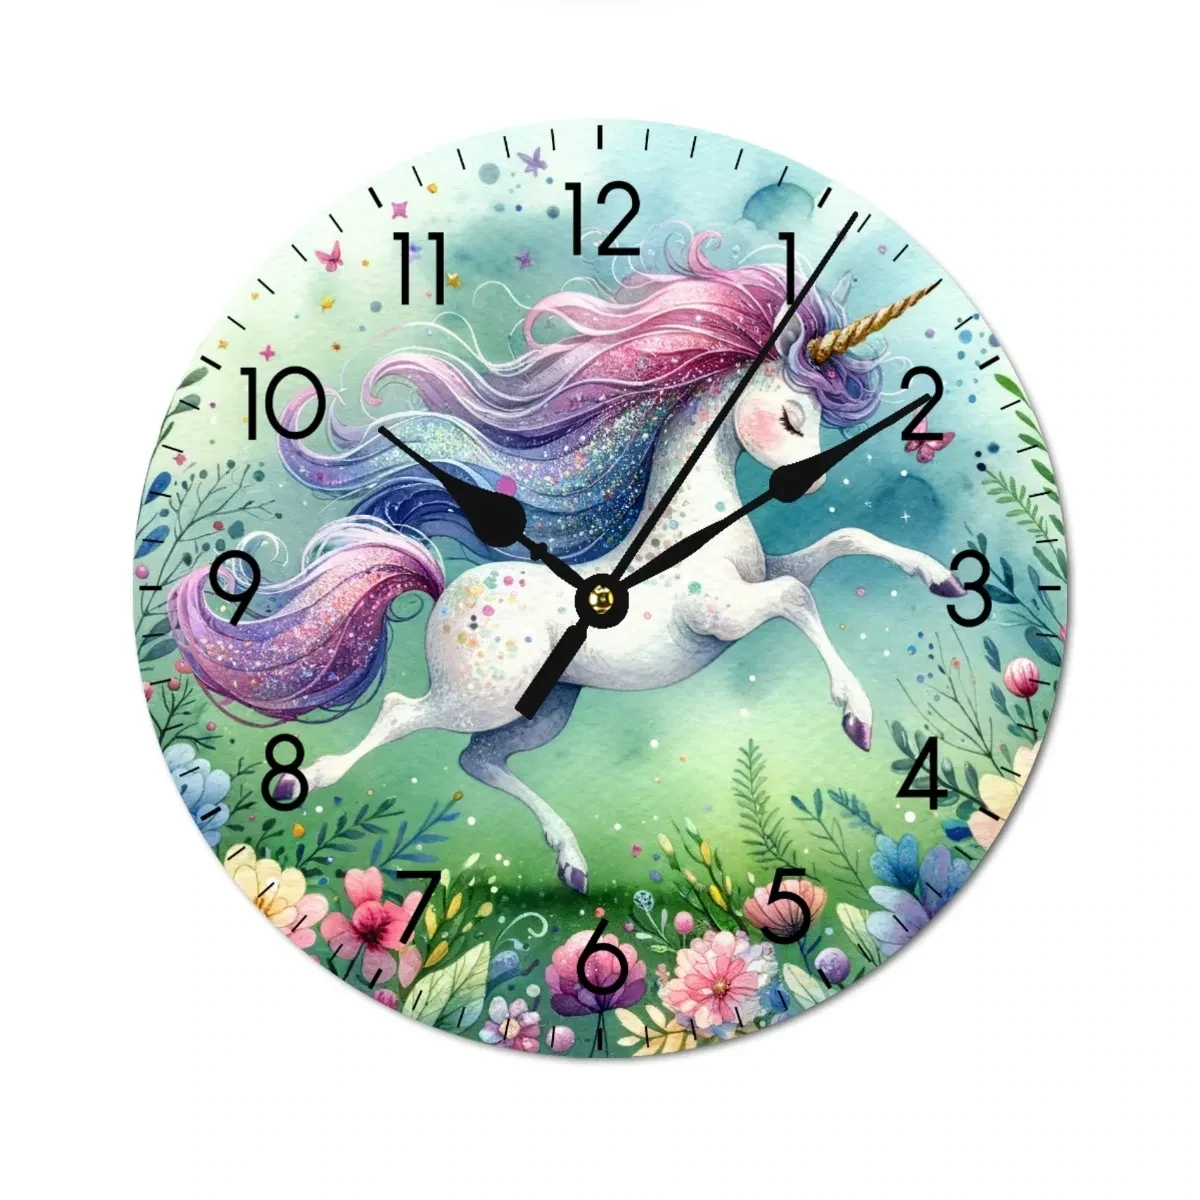 Wooden wall clock with adorable unicorn